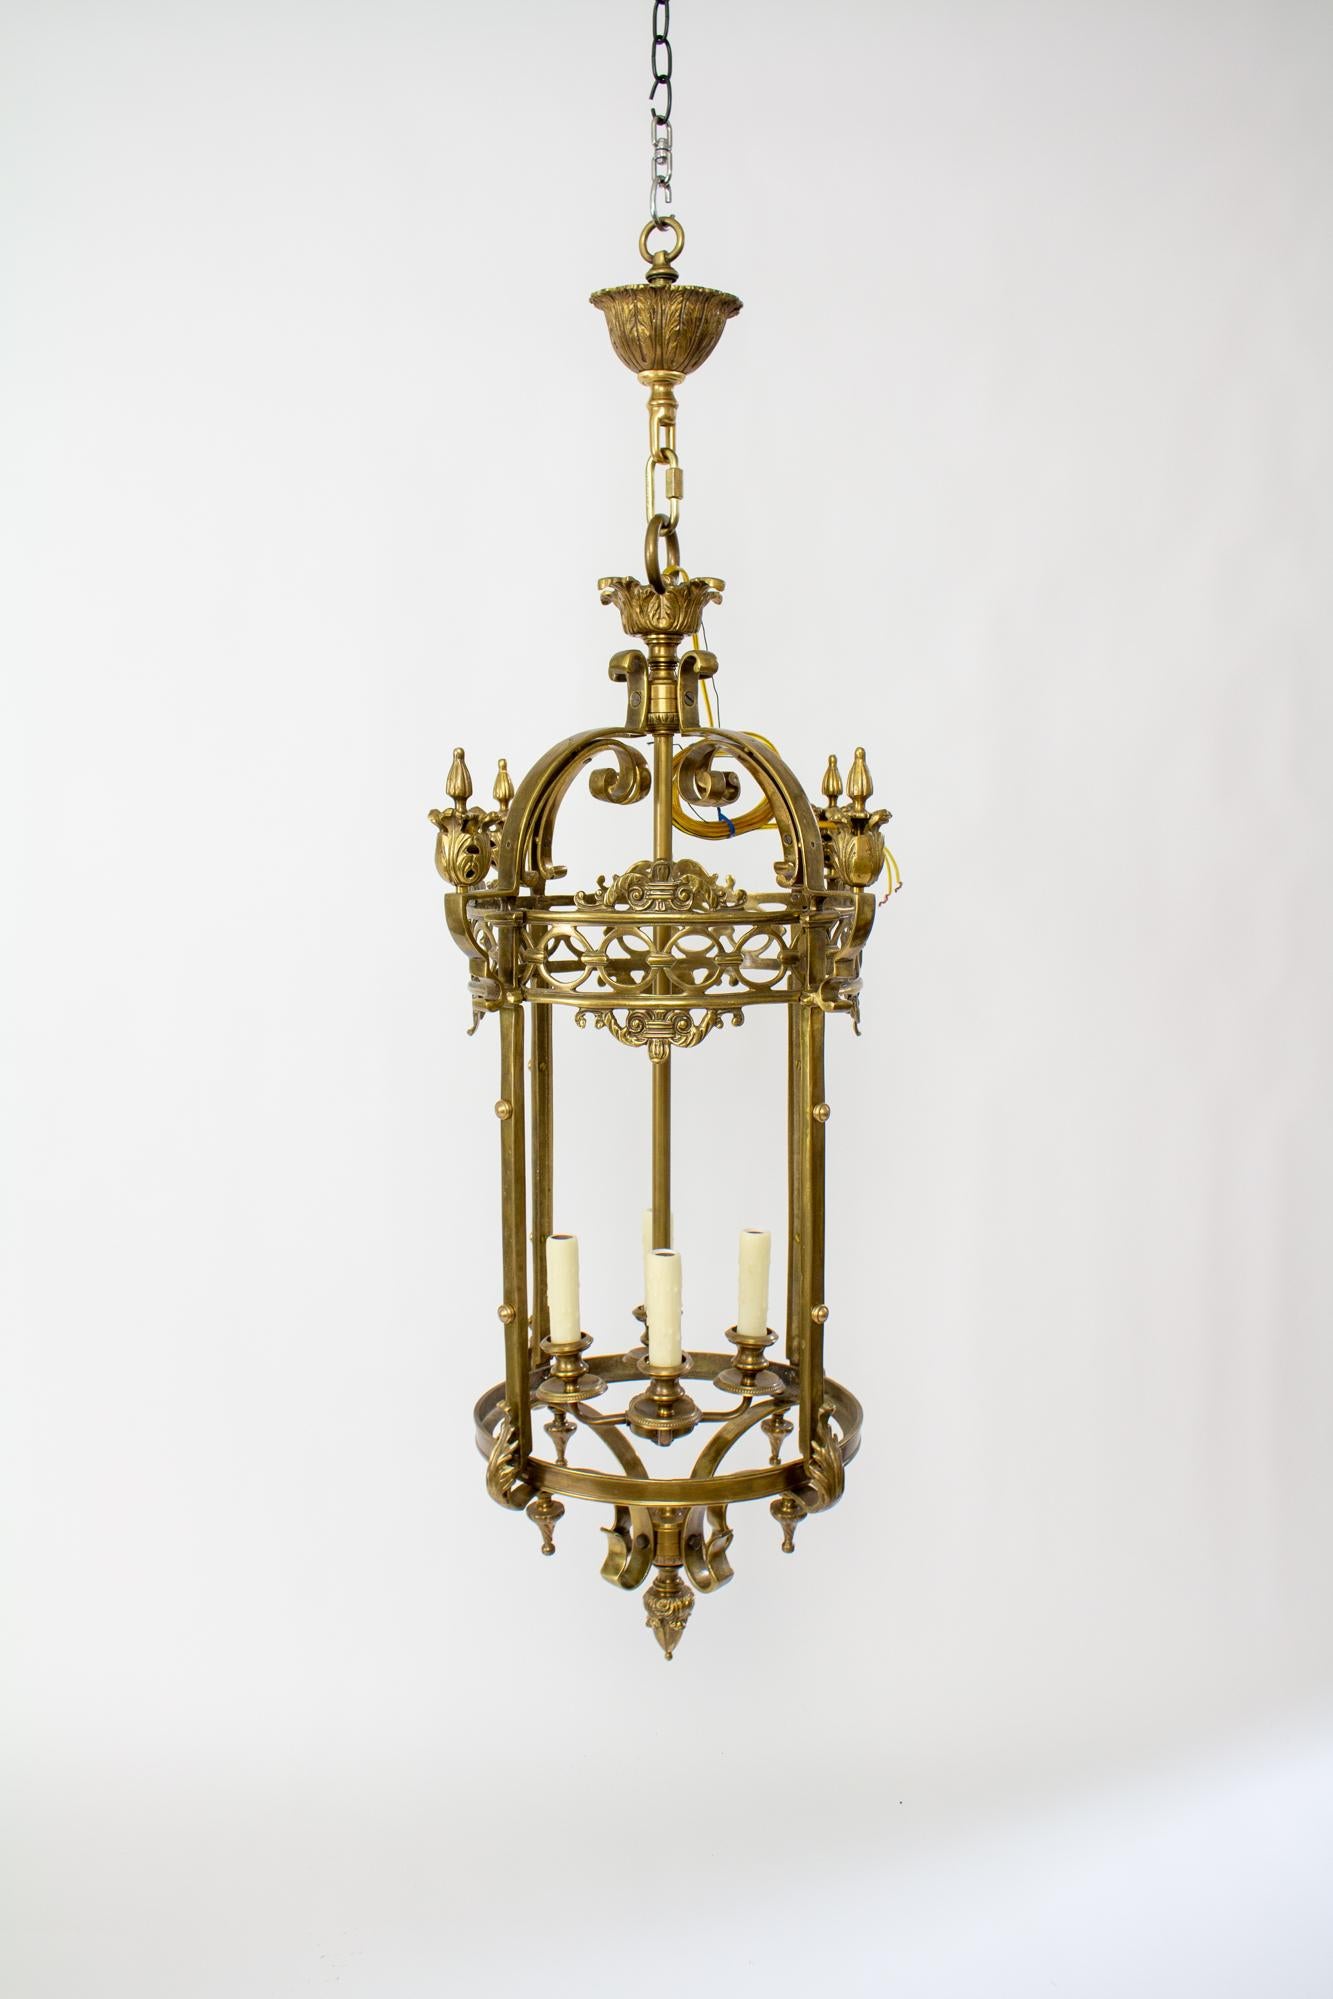 Neoclassical Revival Mid-20th Century Traditional Cast Brass Lantern For Sale